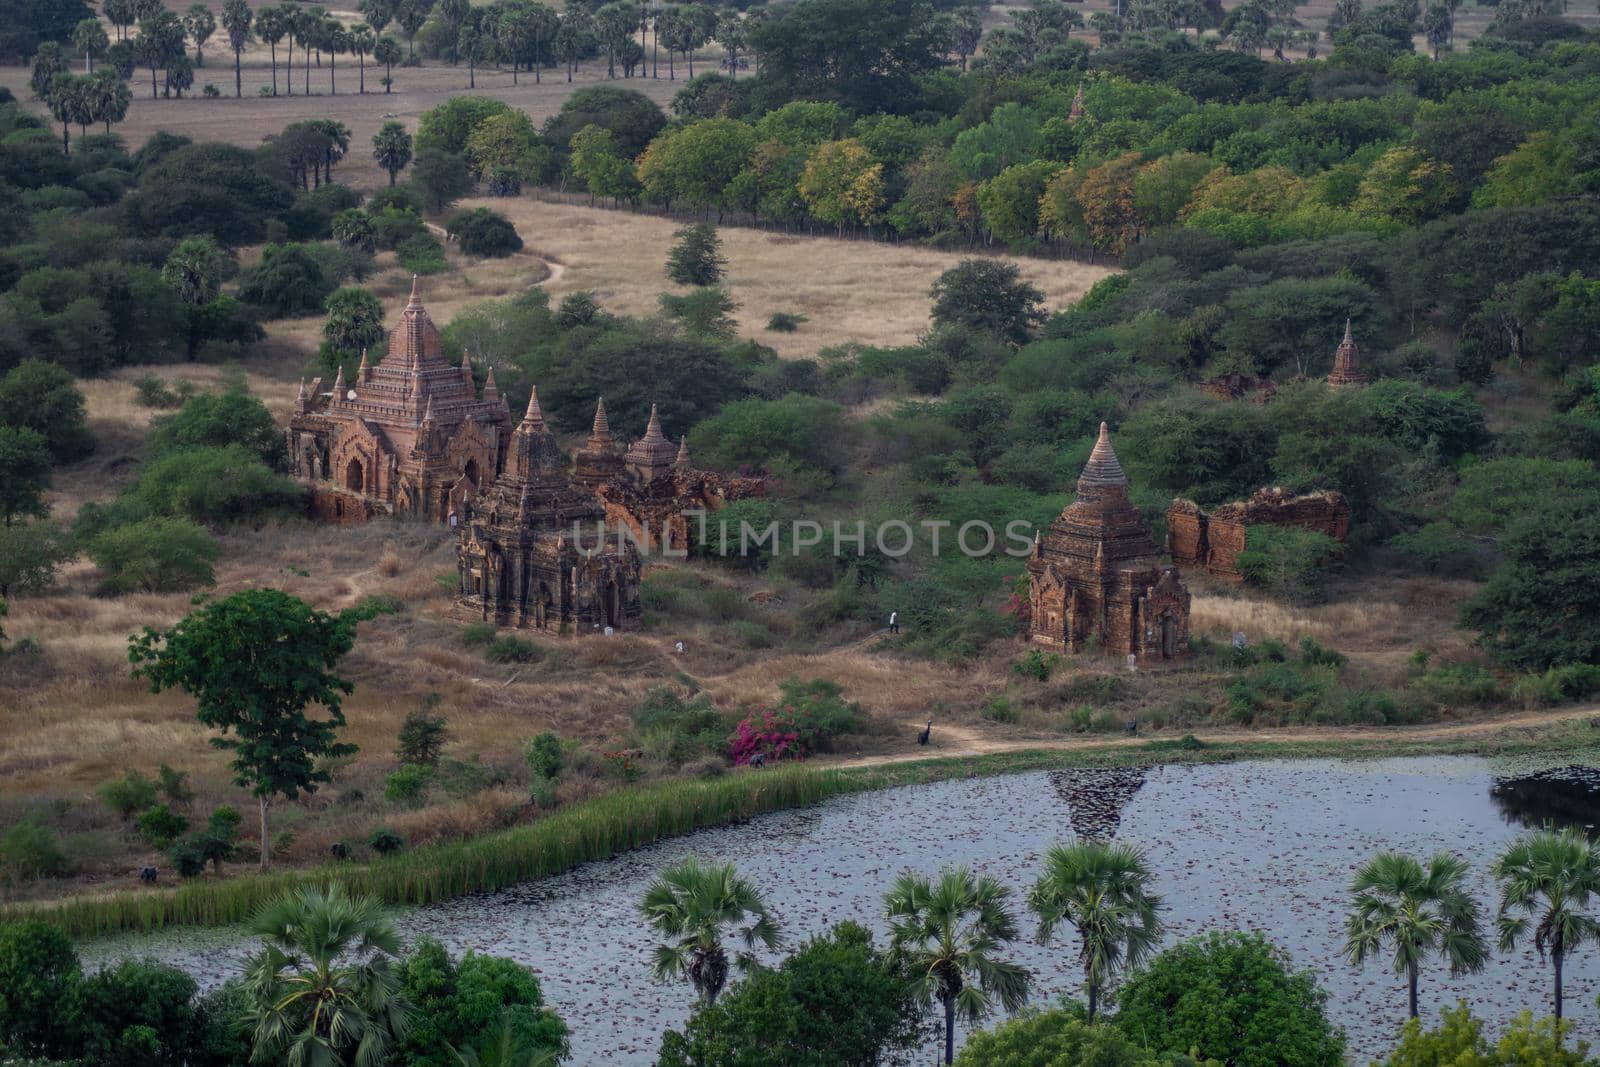 BAGAN, NYAUNG-U, MYANMAR - 3 JANUARY 2020: Looking out over a few old historical and religious temples by a pond from the tall Nan Myint viewing tower